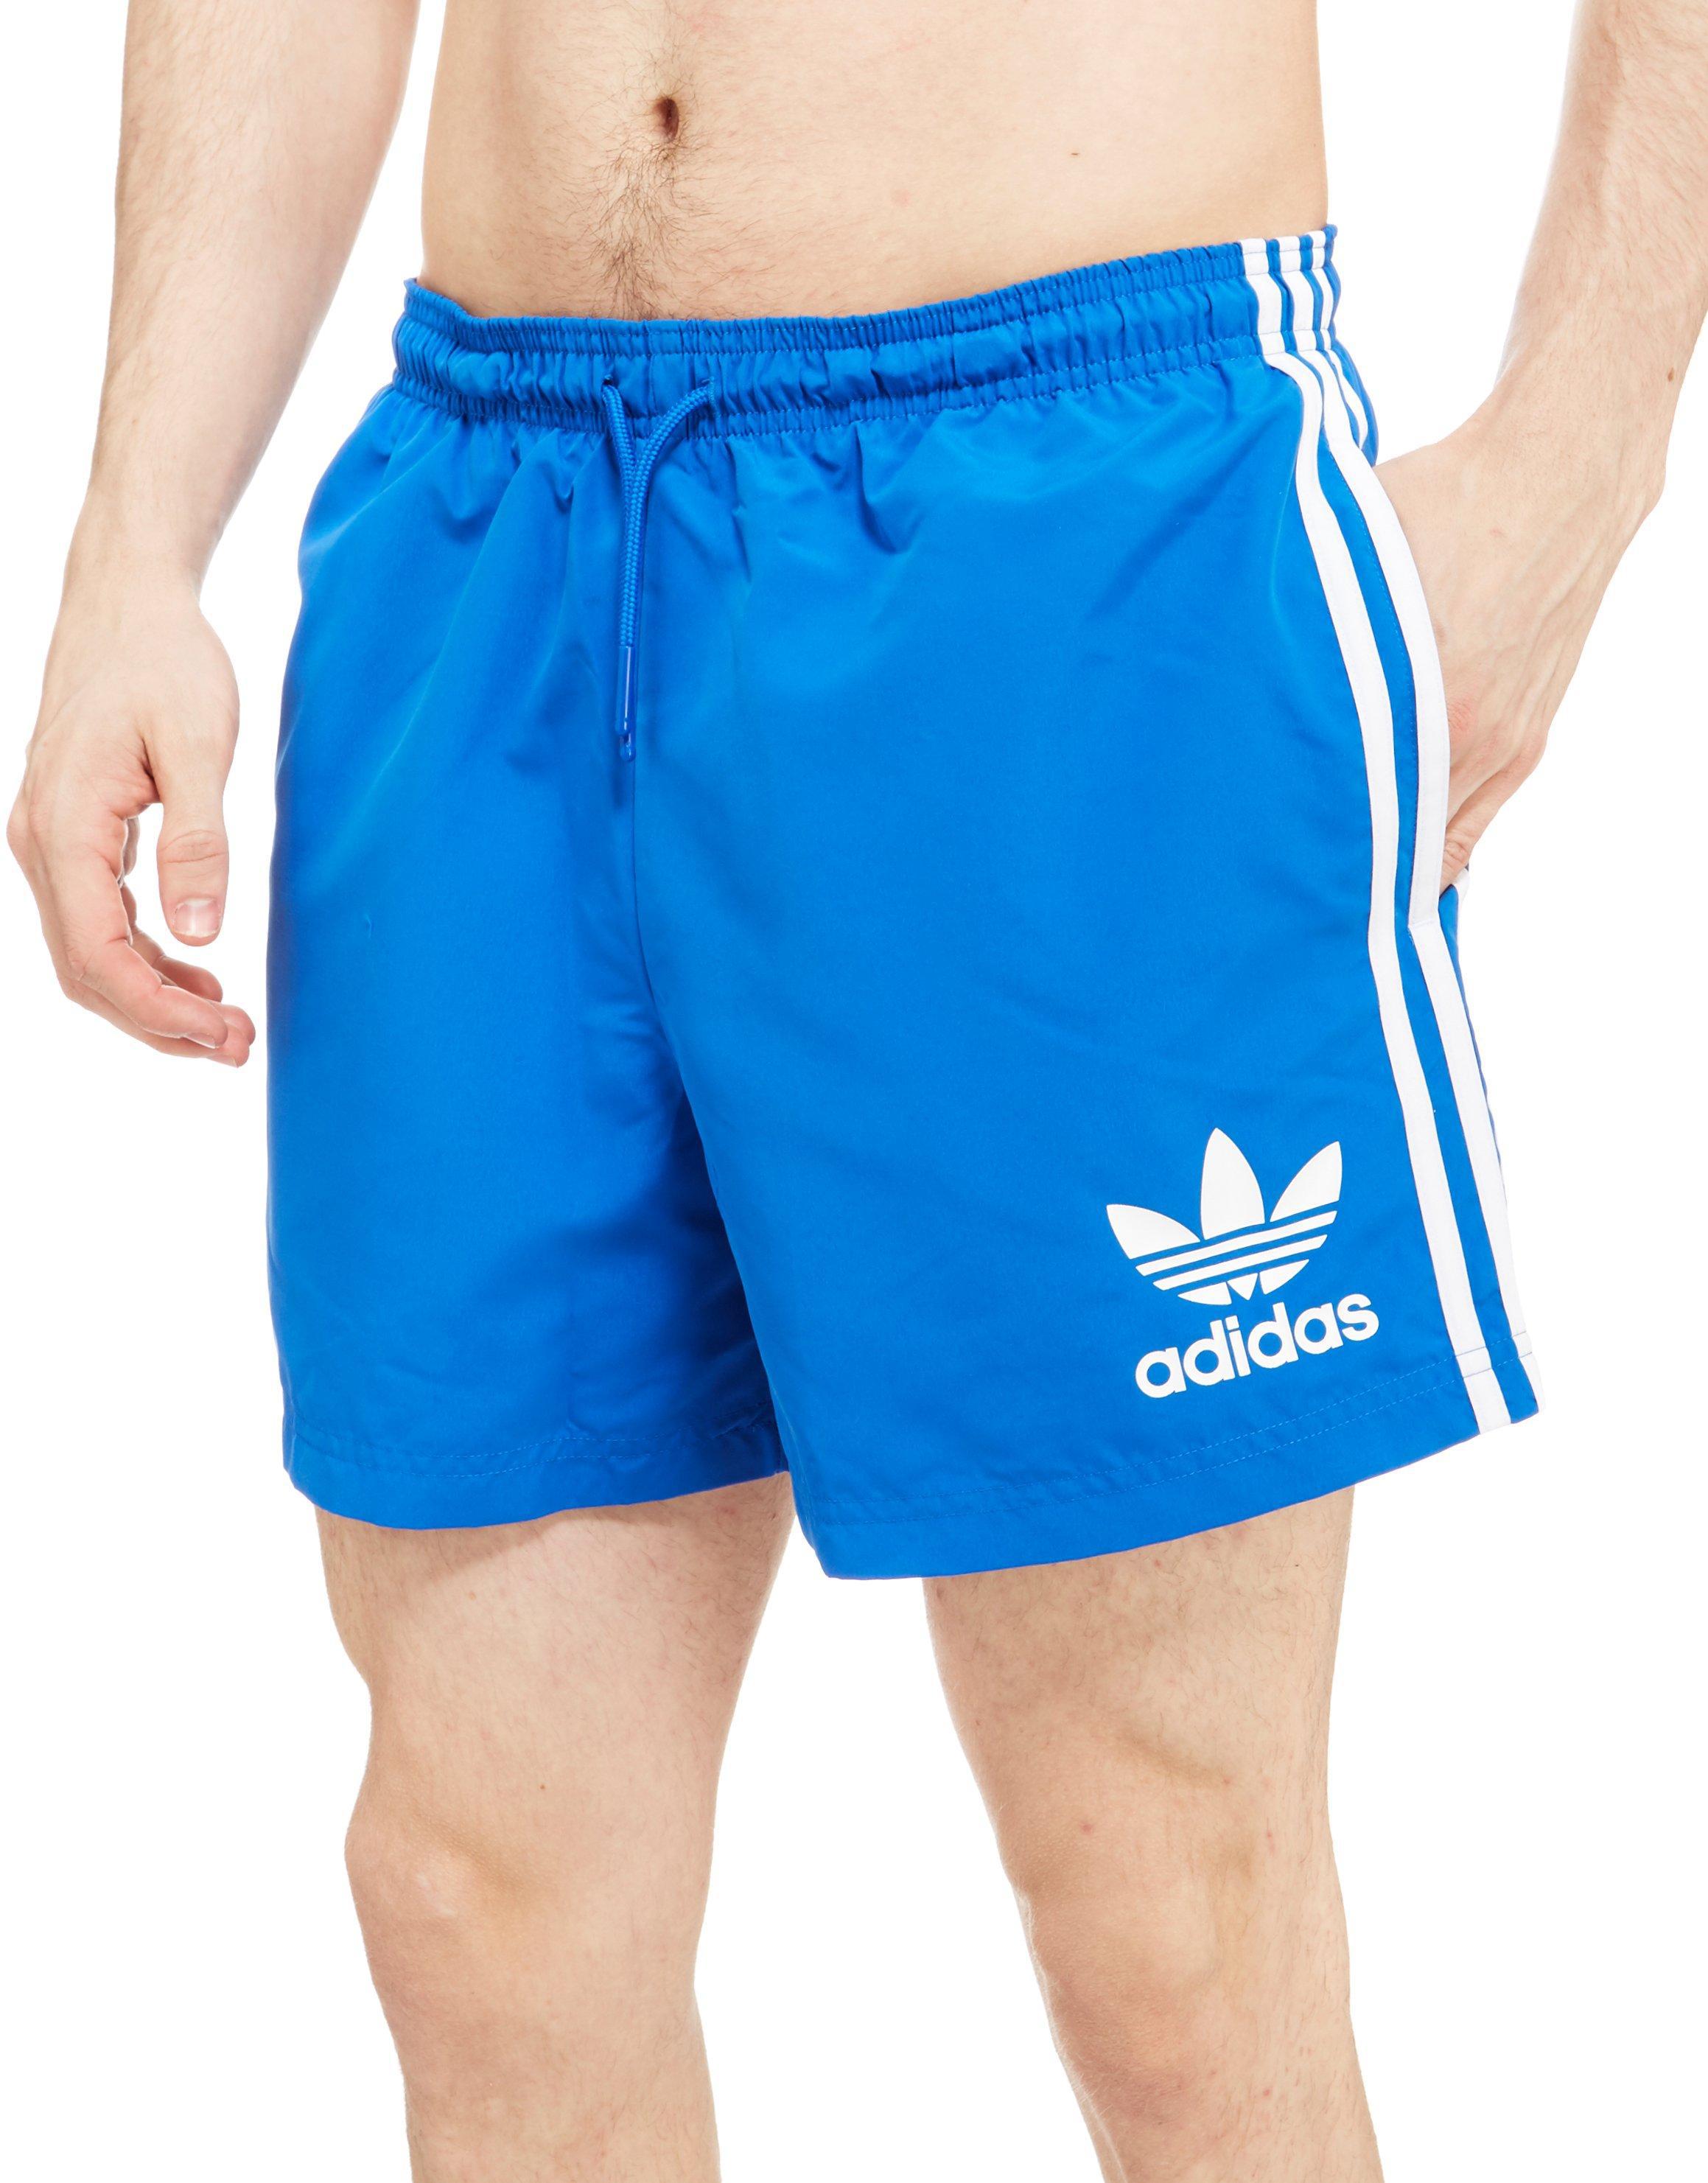 adidas Originals Synthetic Cali Swimshorts in Blue for Men - Lyst